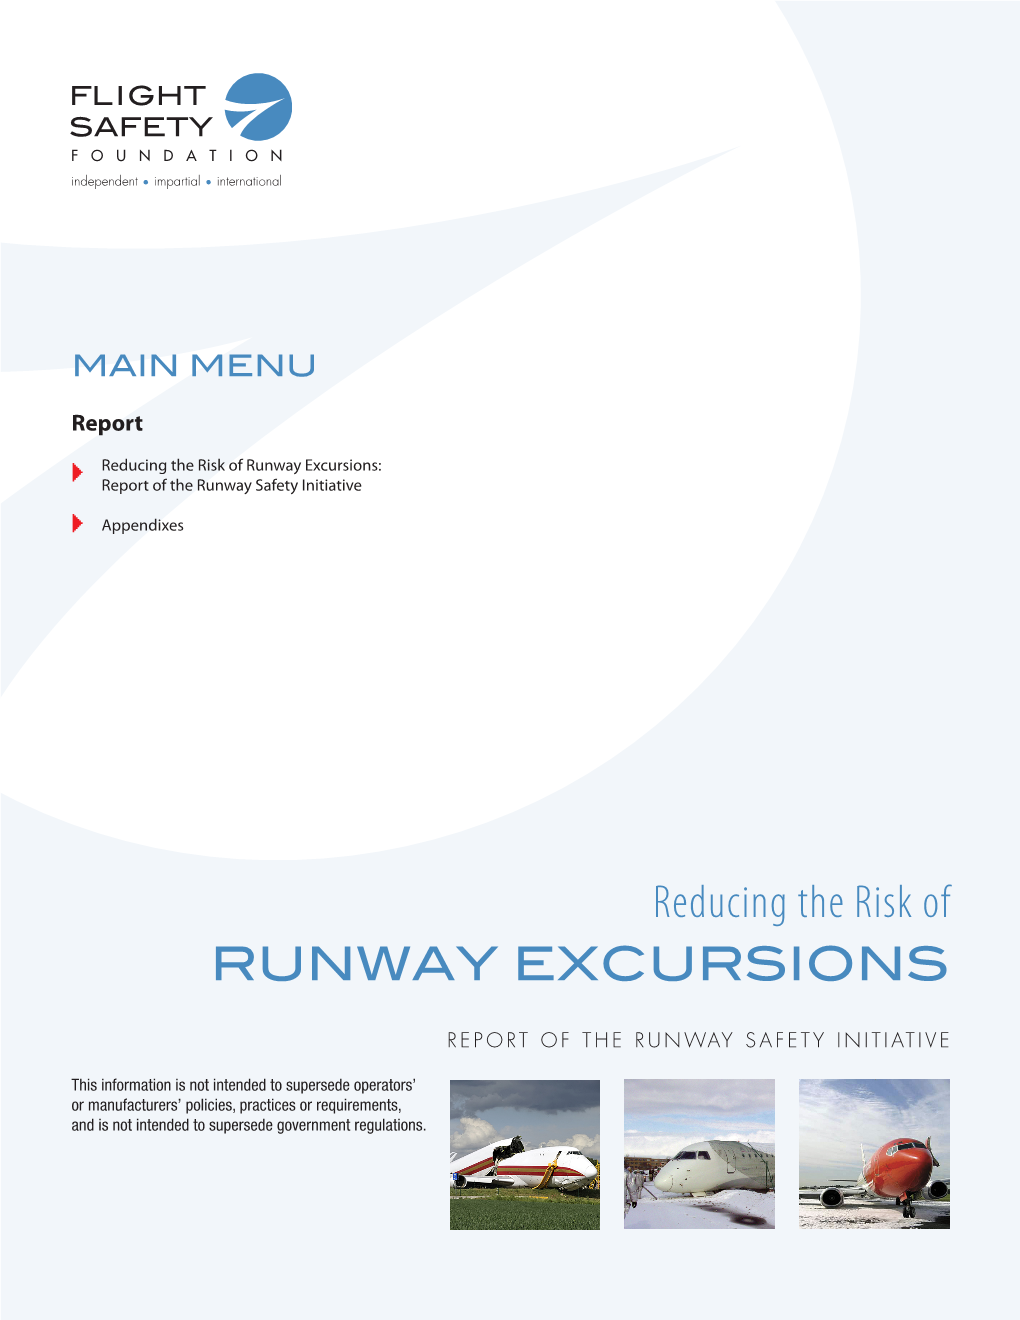 Reducing the Risk Runway Excursions